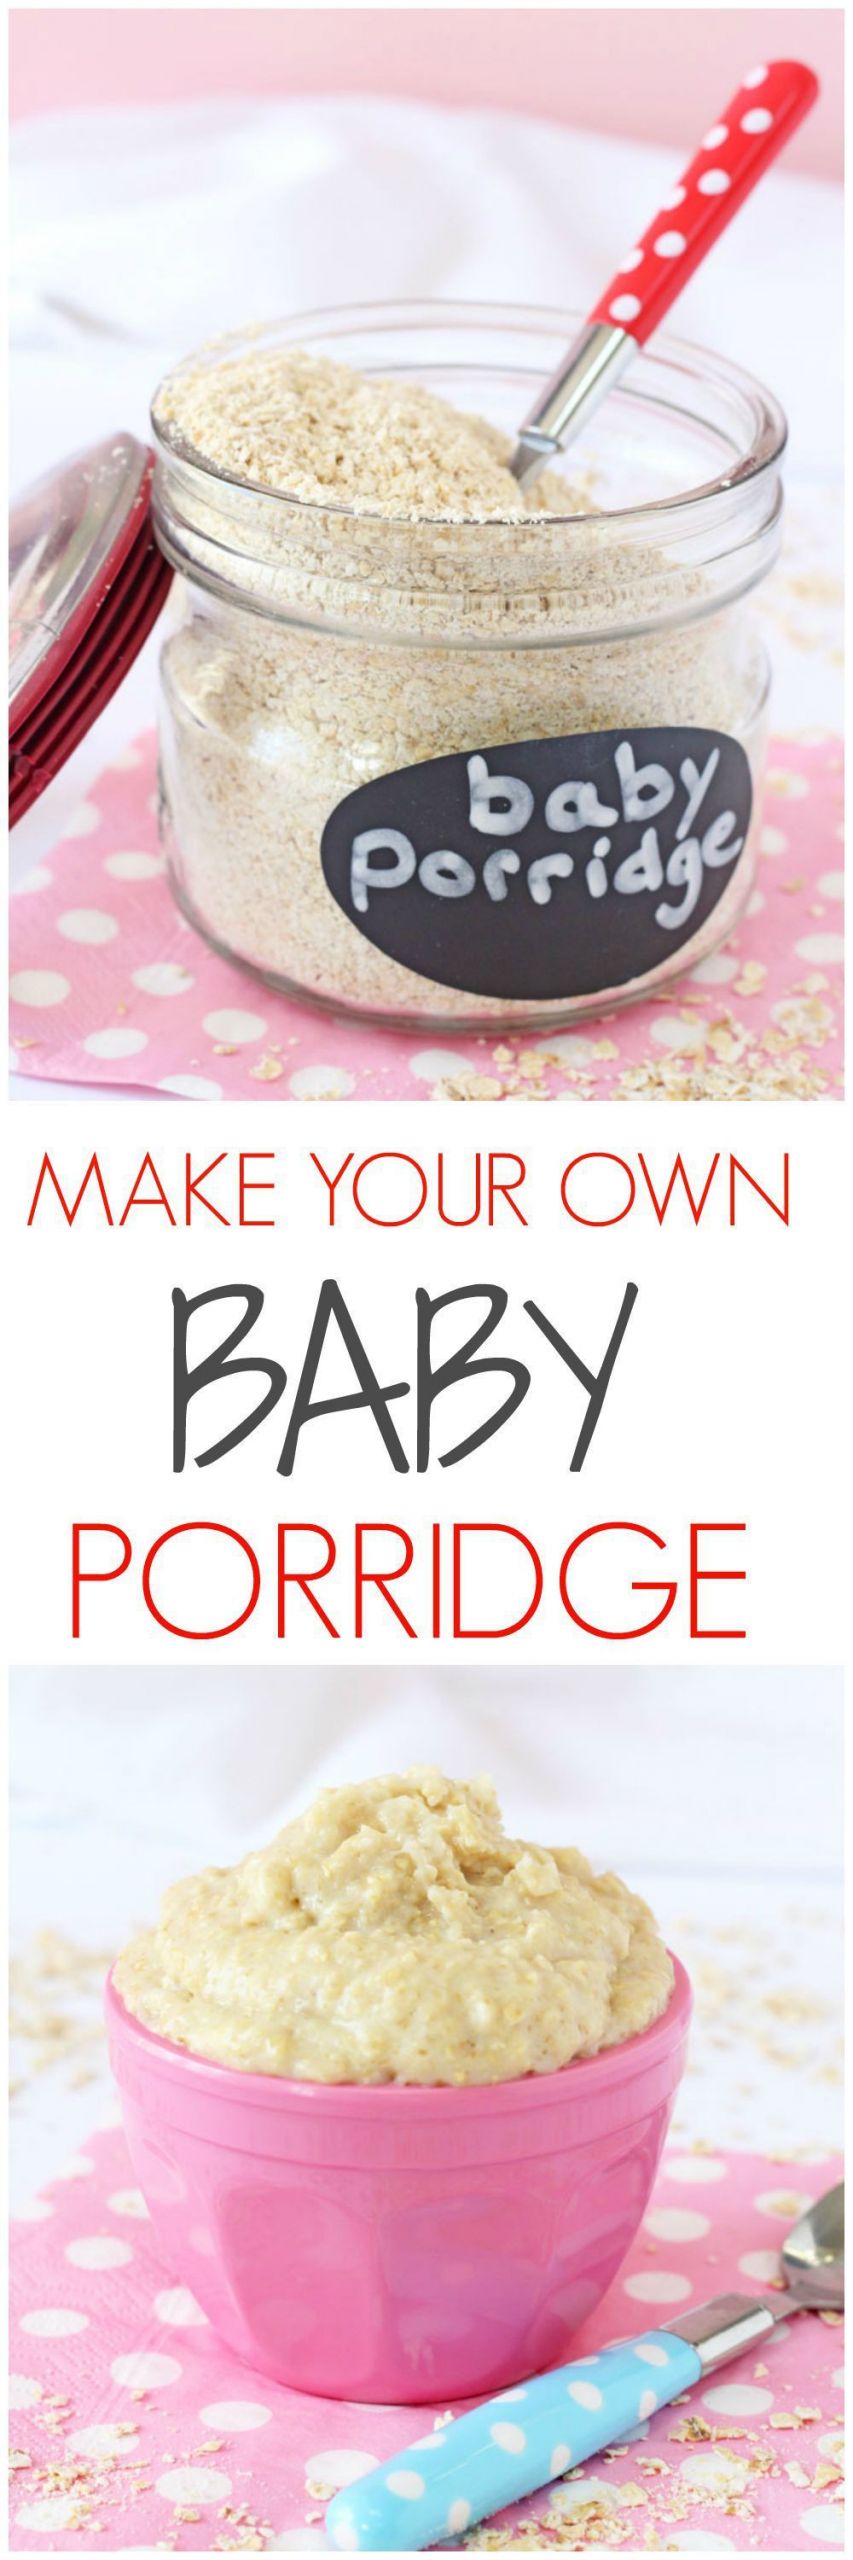 Make Your Own Baby Food Recipes
 Make Your Own Baby Porridge Recipe